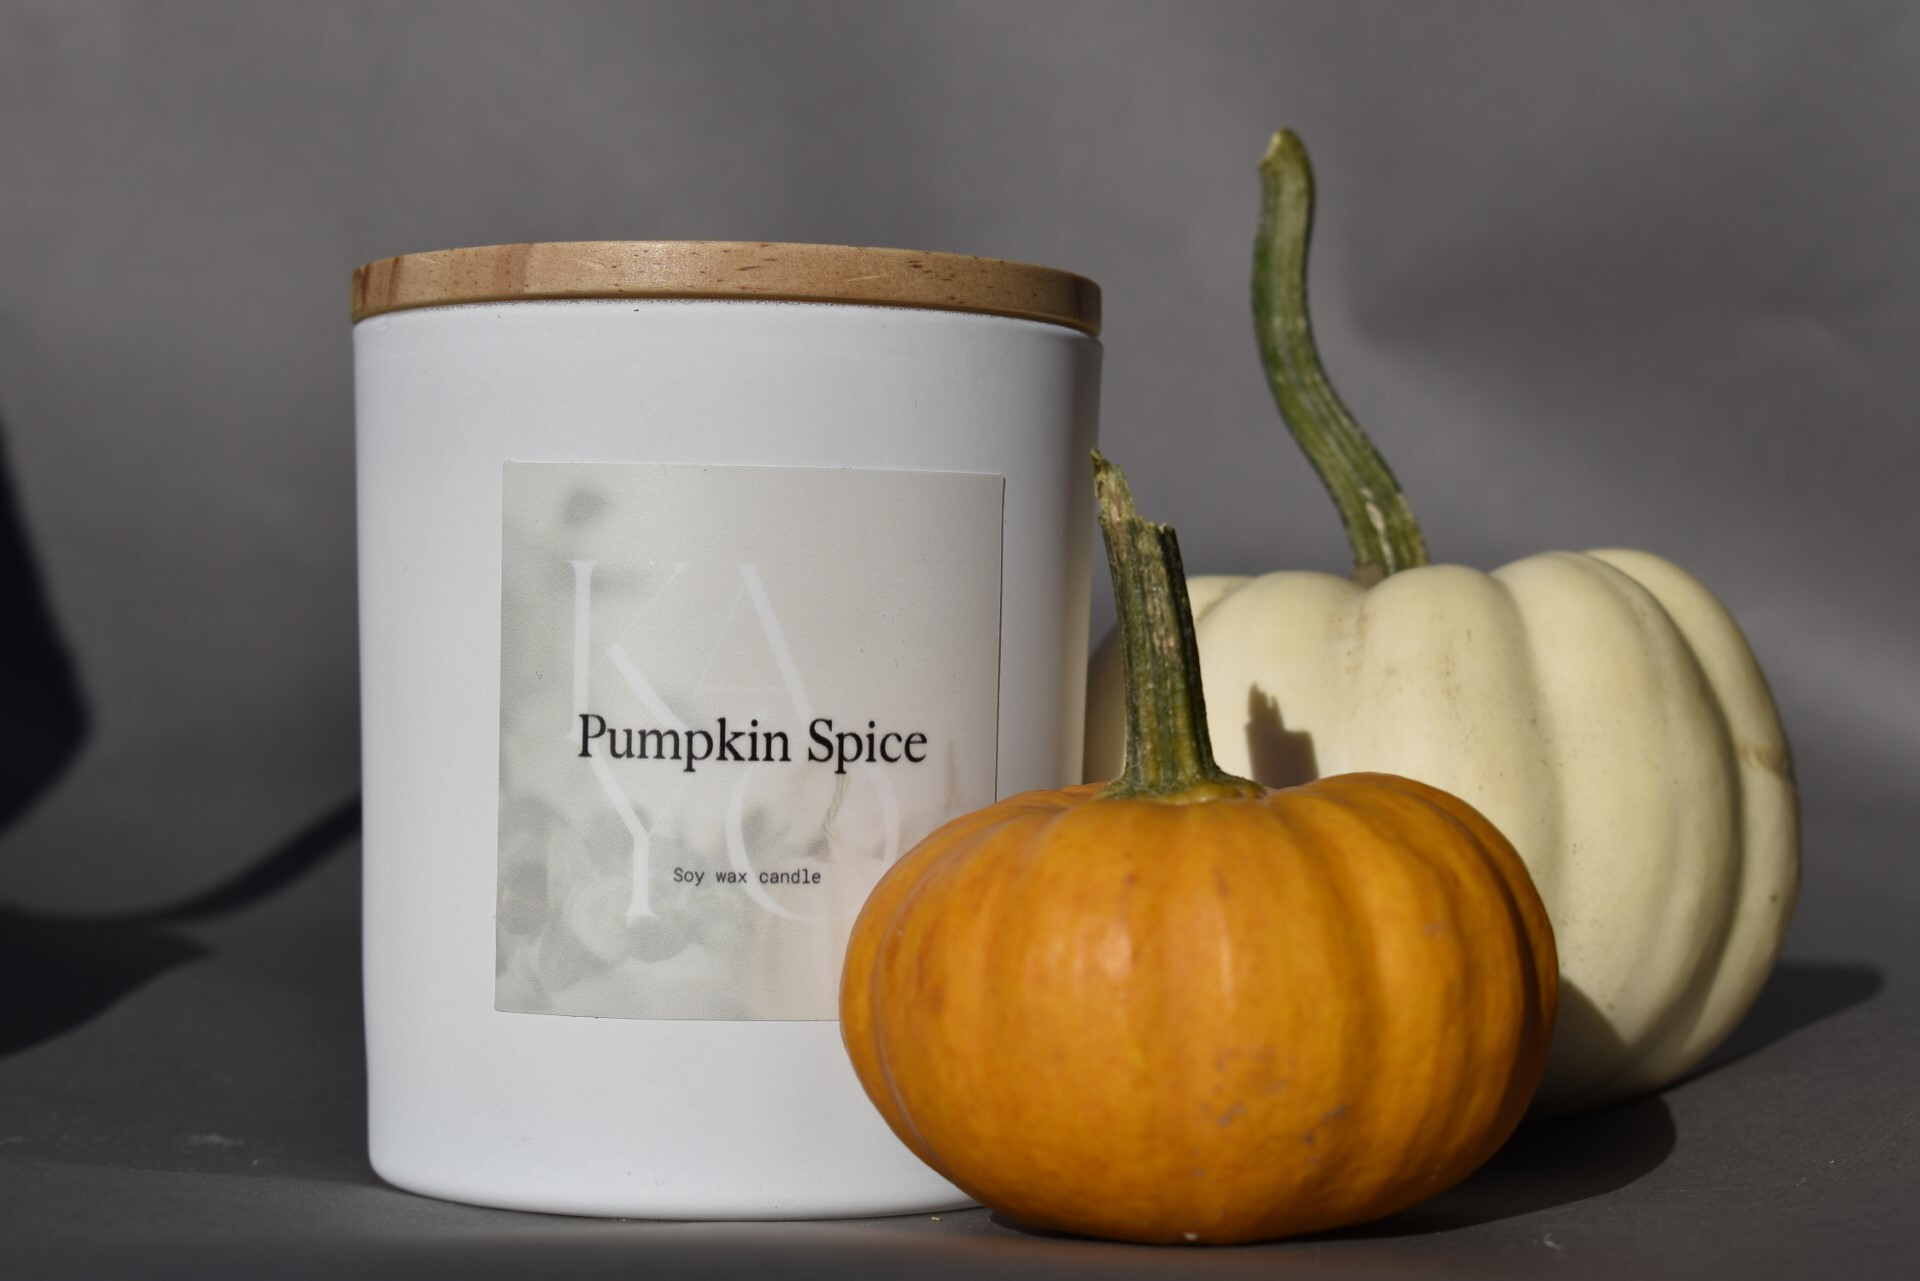 Kayo+Scented+Candle+Pumkin+Spice